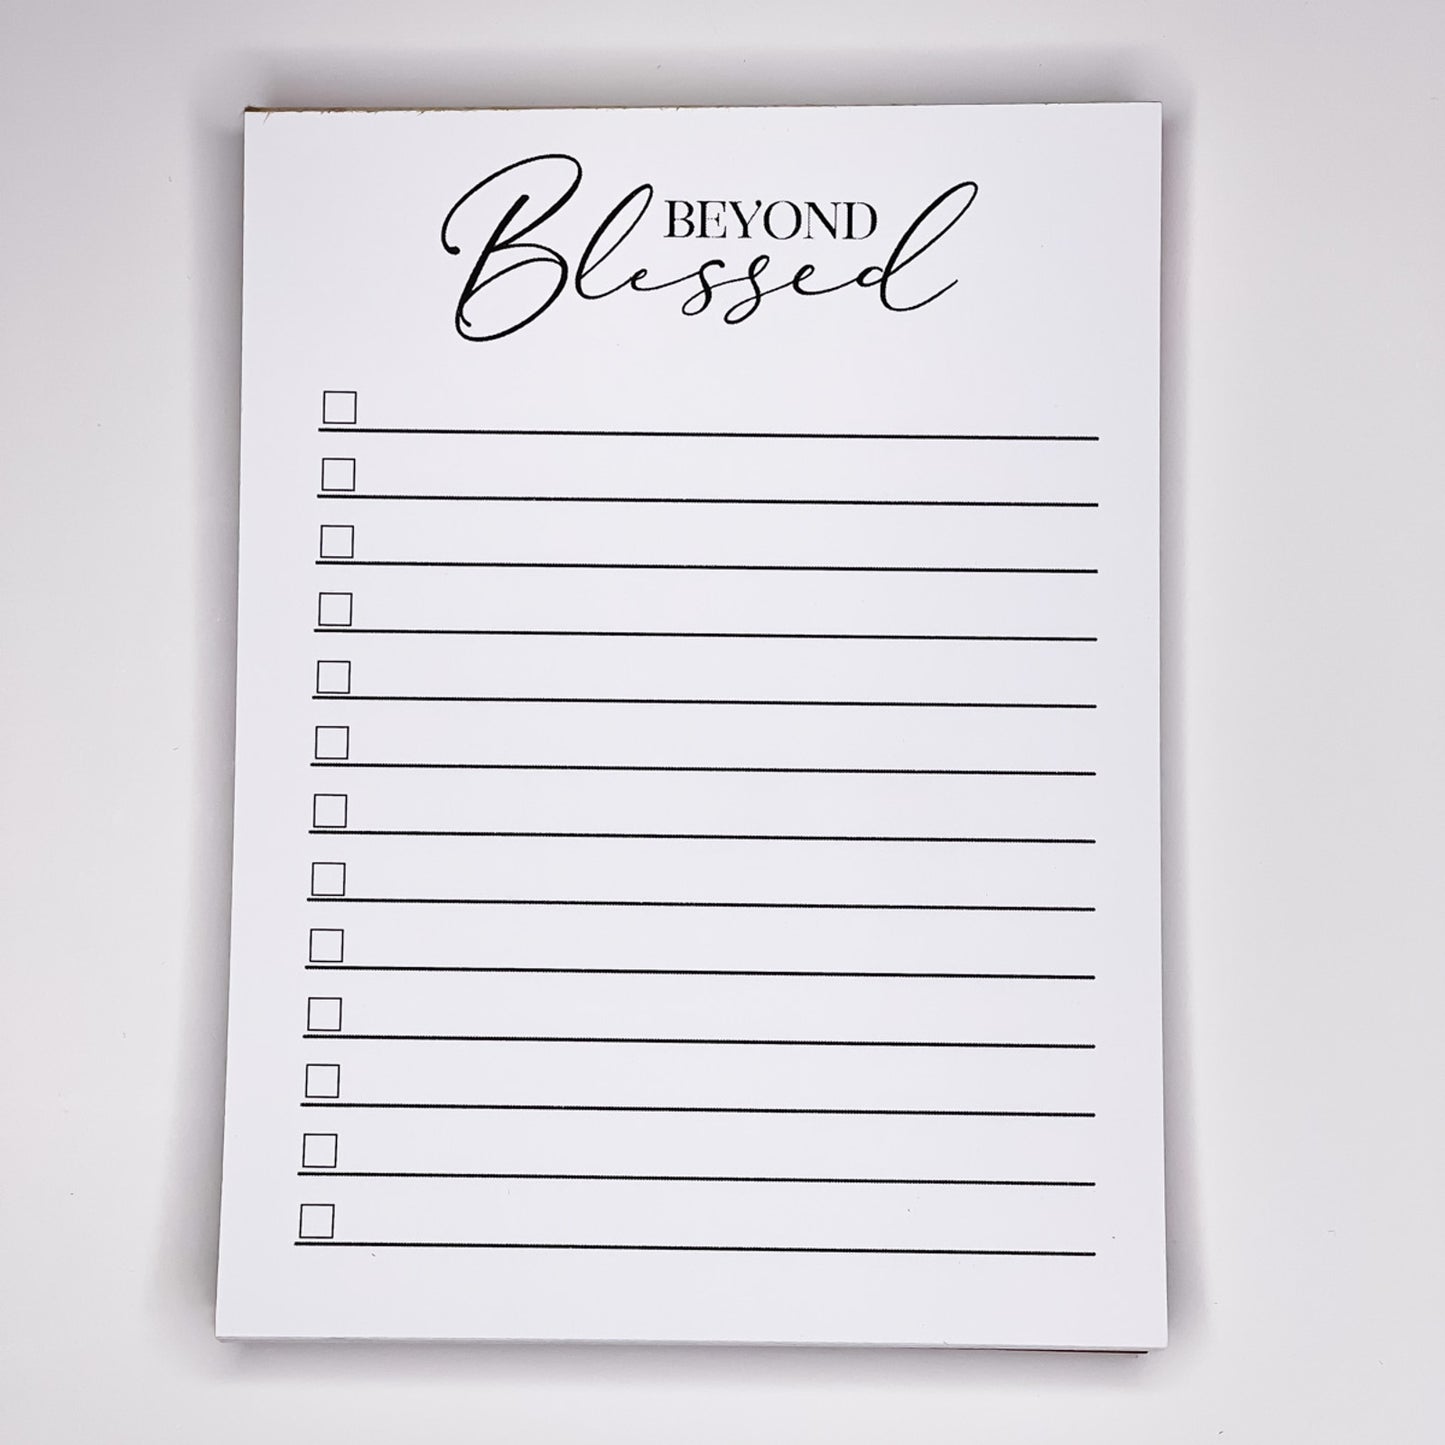 Beyond Blessed List - Notepad